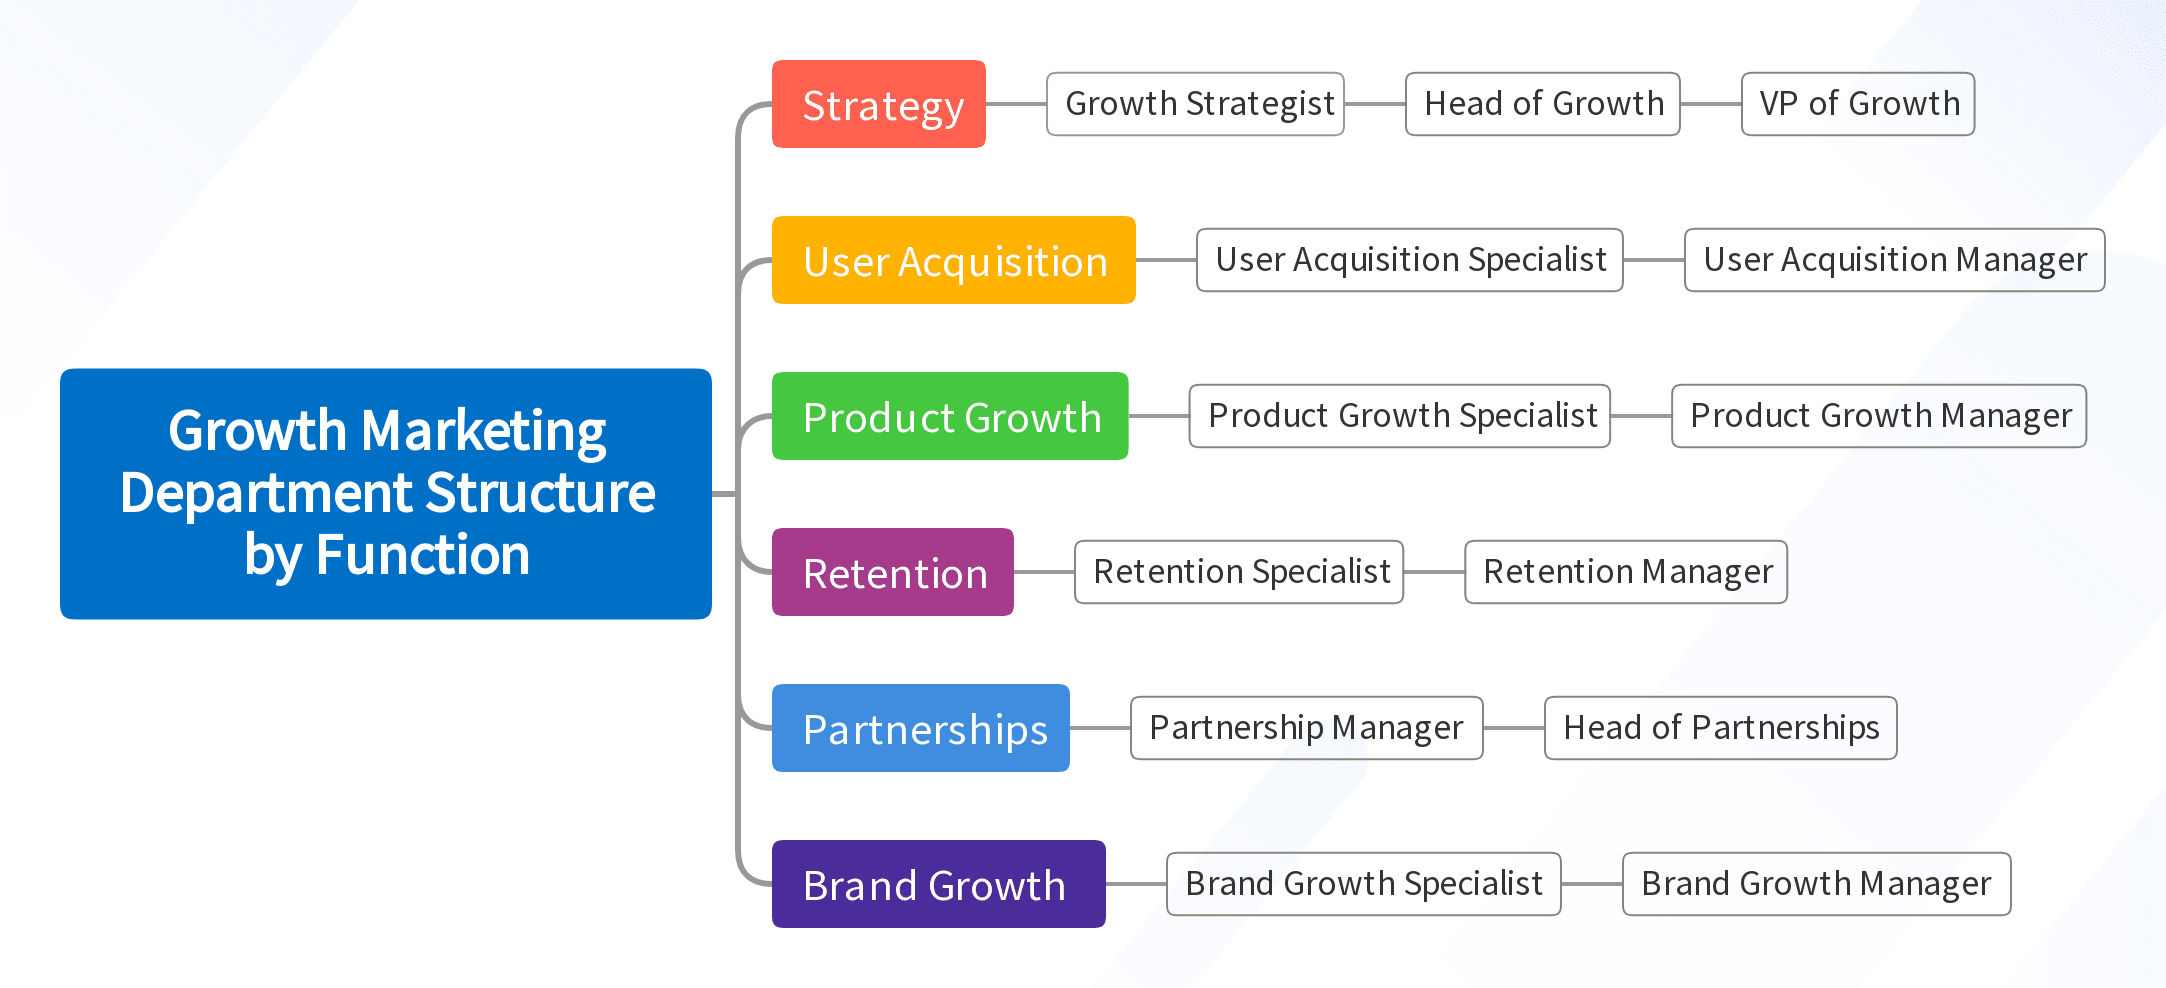 Growth Marketing Department Structure by Function